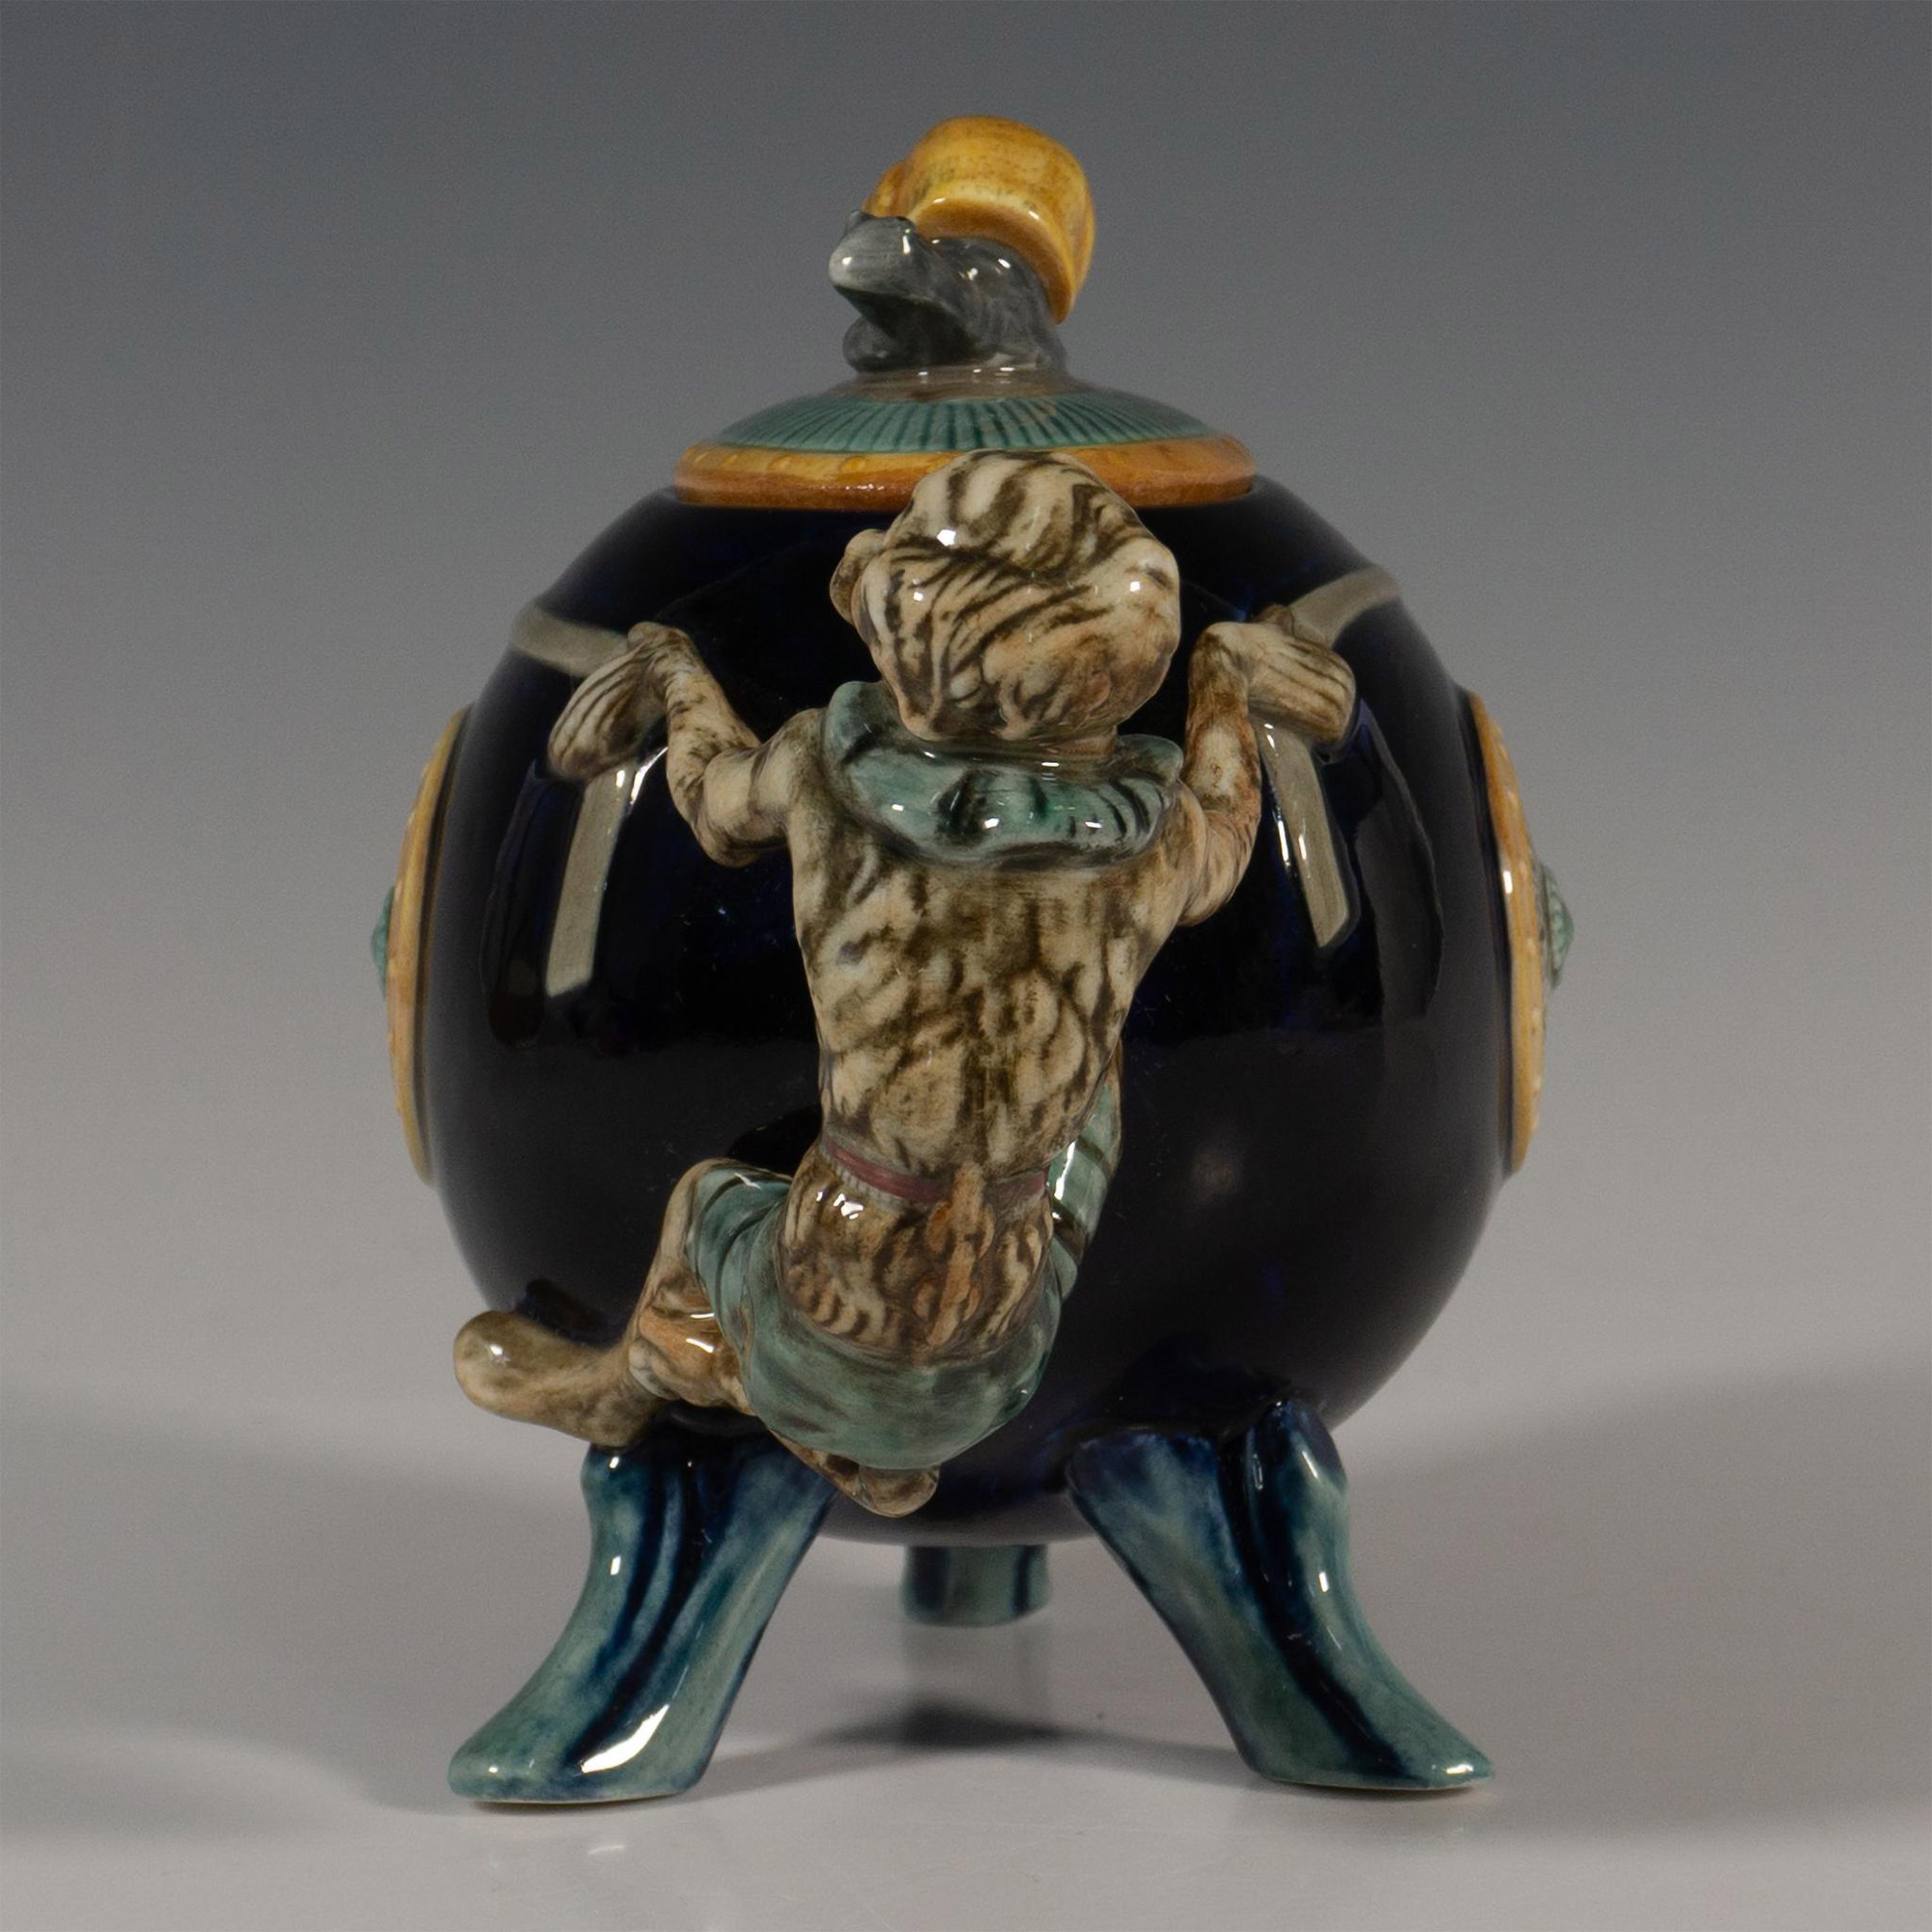 Minton Archive Limited Edition Cockerel and Monkey Teapot - Image 4 of 6